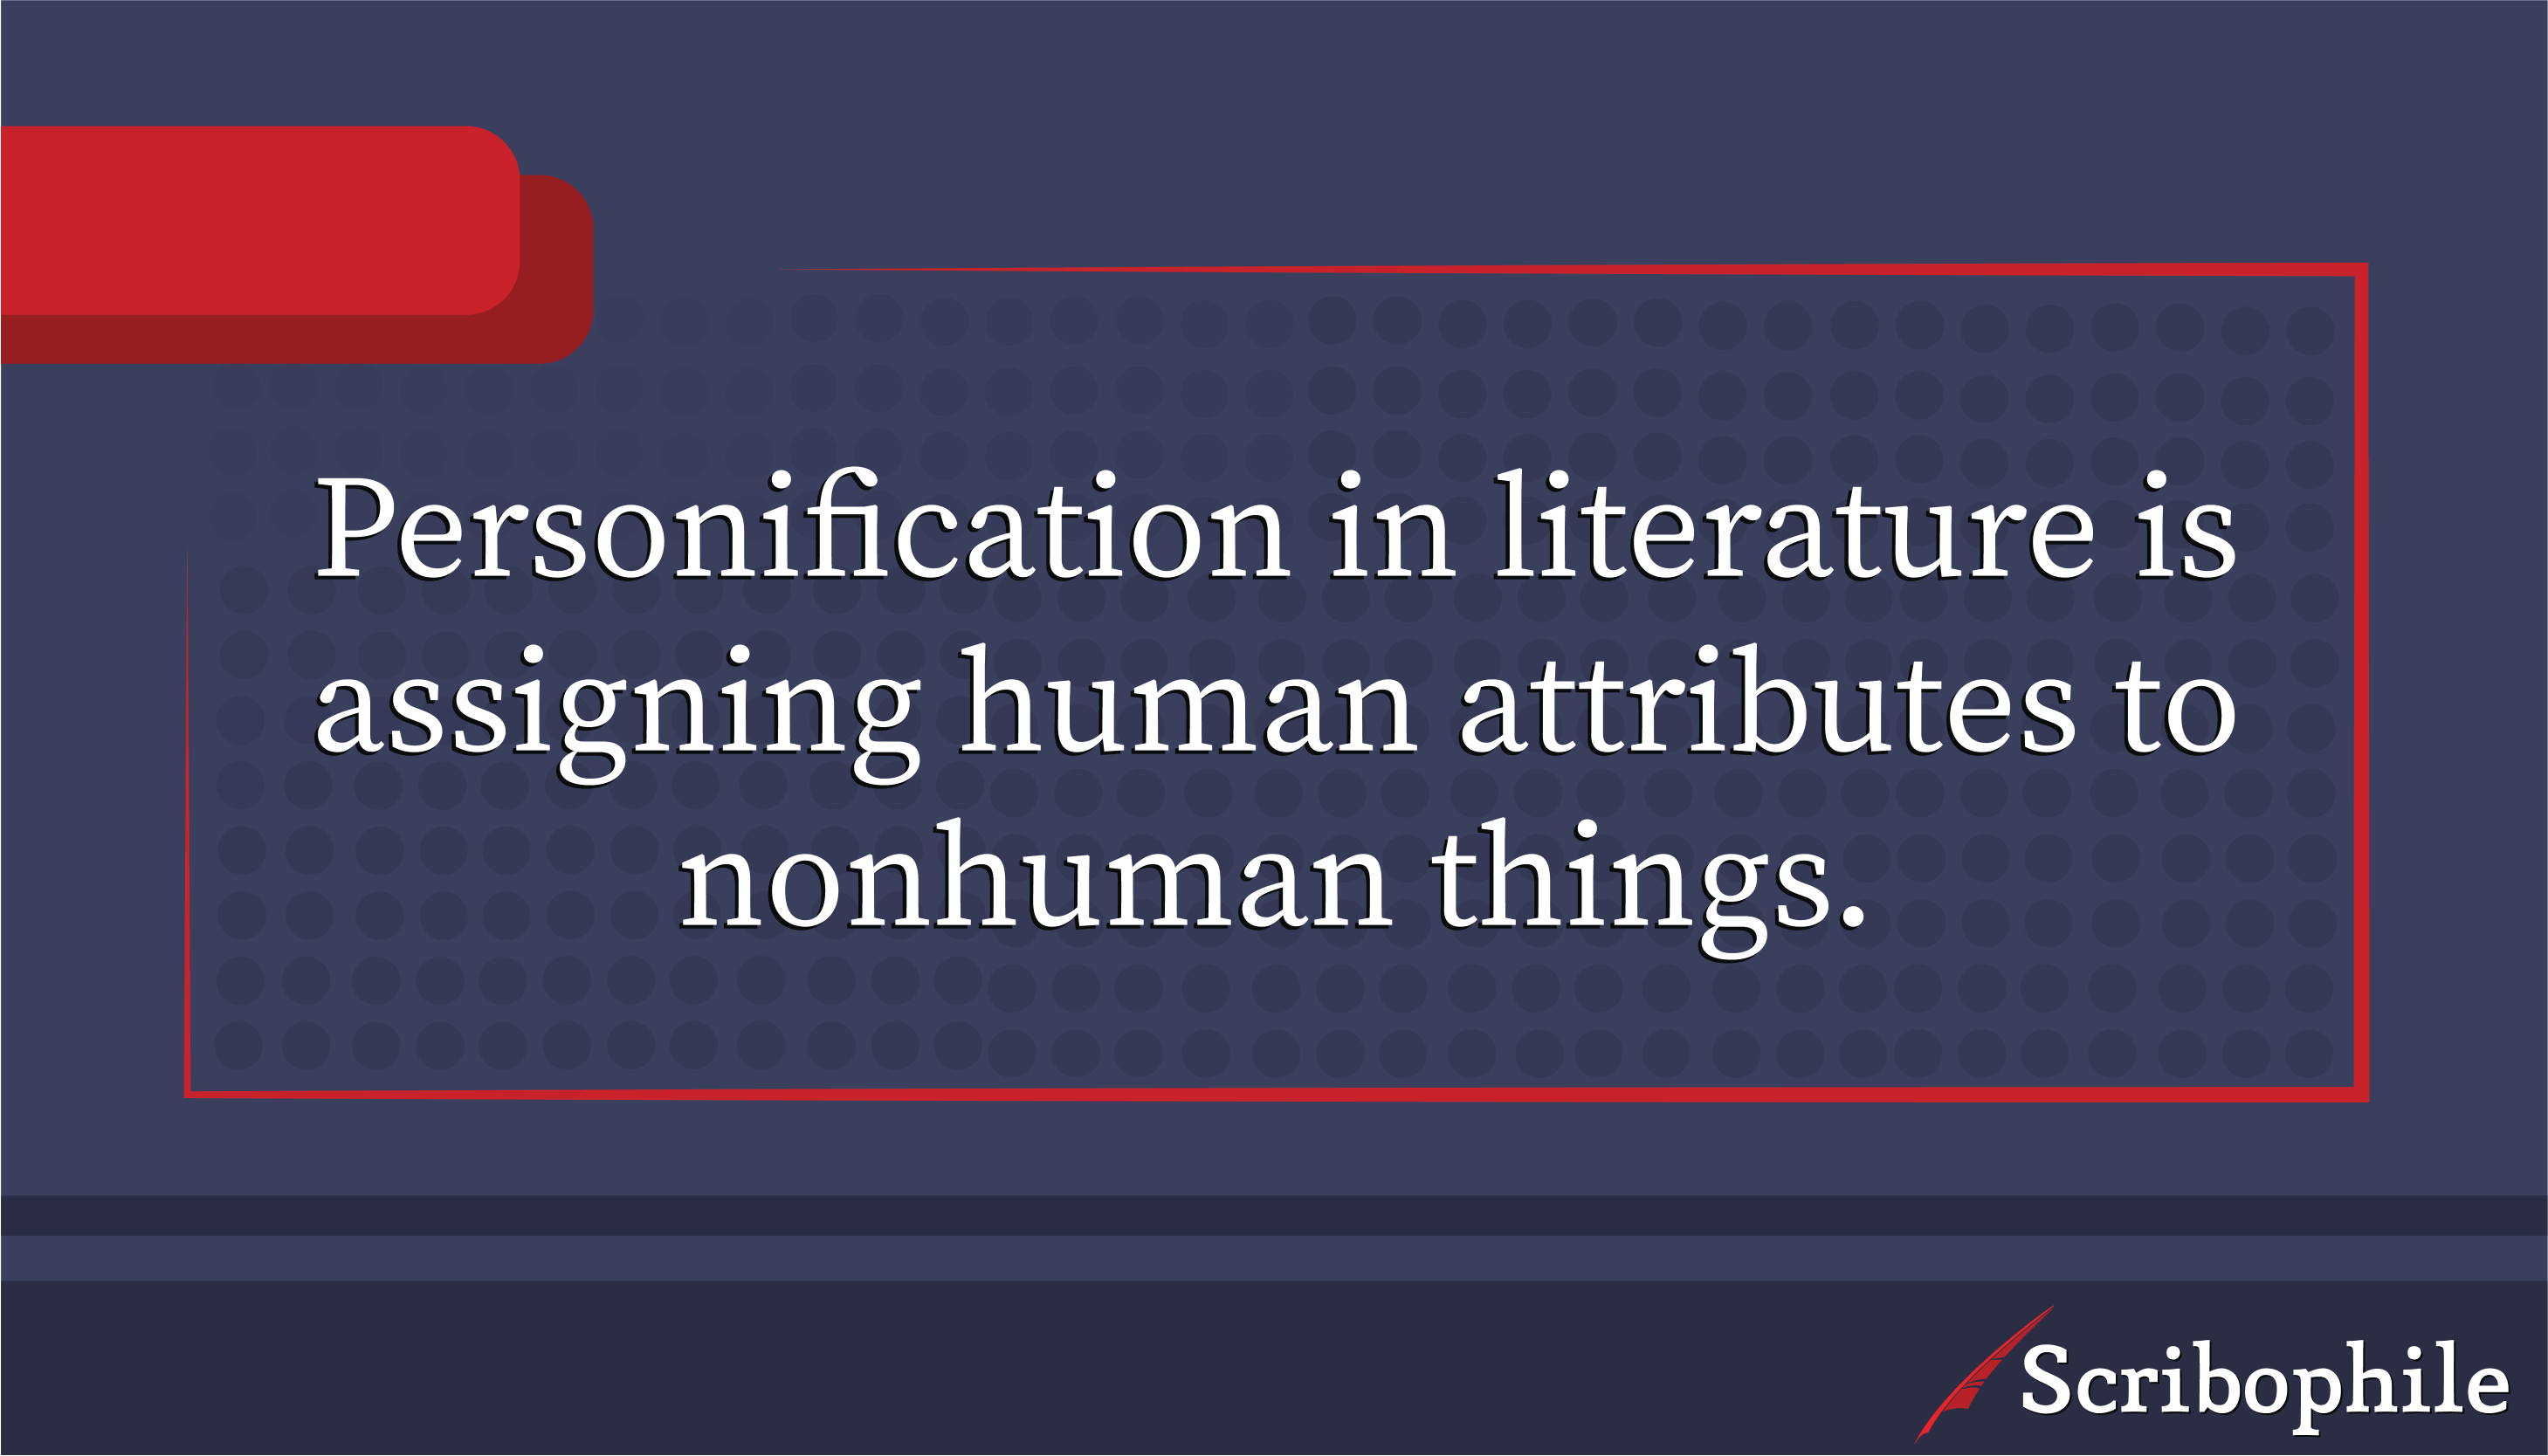 Personification in literature is assigning human attributes to nonhuman things.